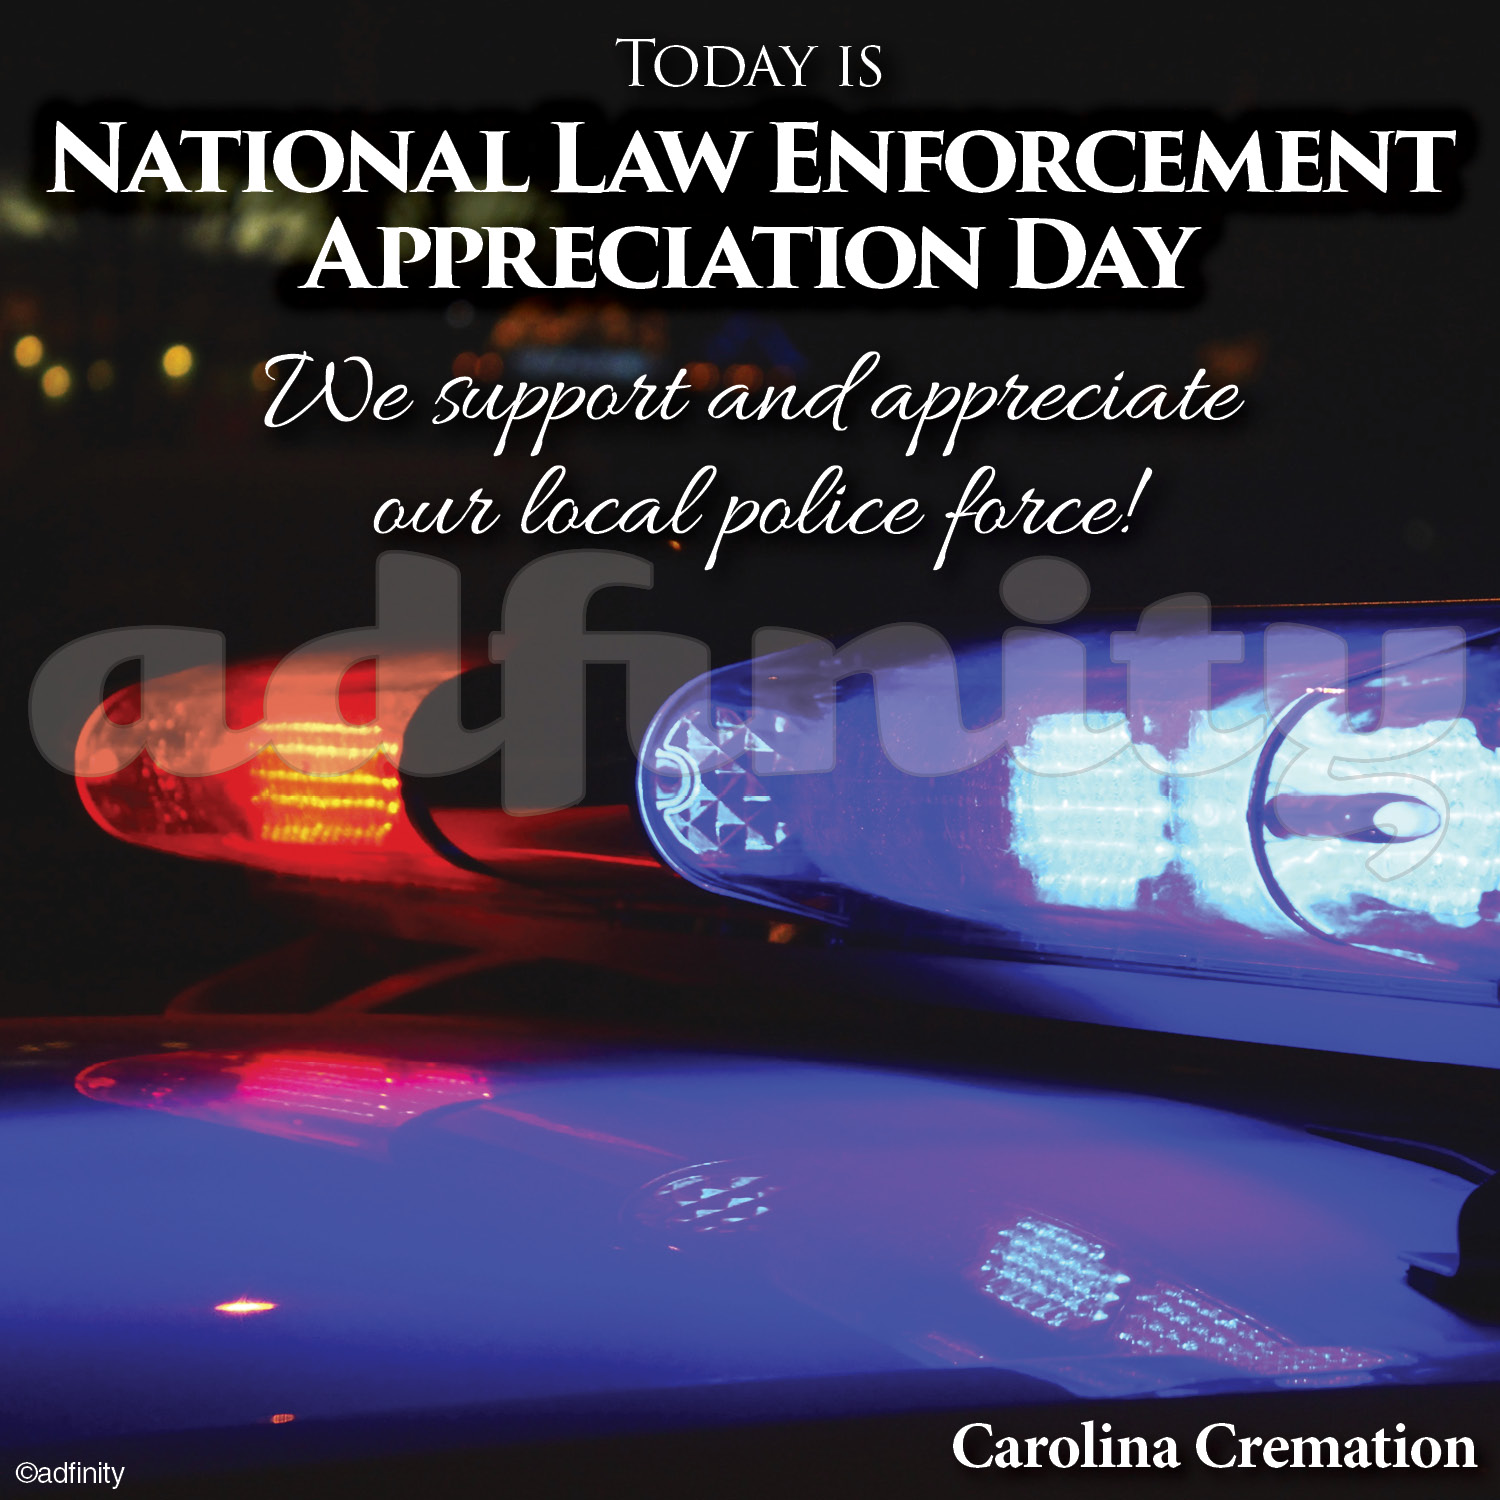 011501 National Law Enforcement Appreciation Day. We Support And Appreciate Our Local Police Force! Police Lights National Law Enforcement Appreciation Day Facebook Meme 